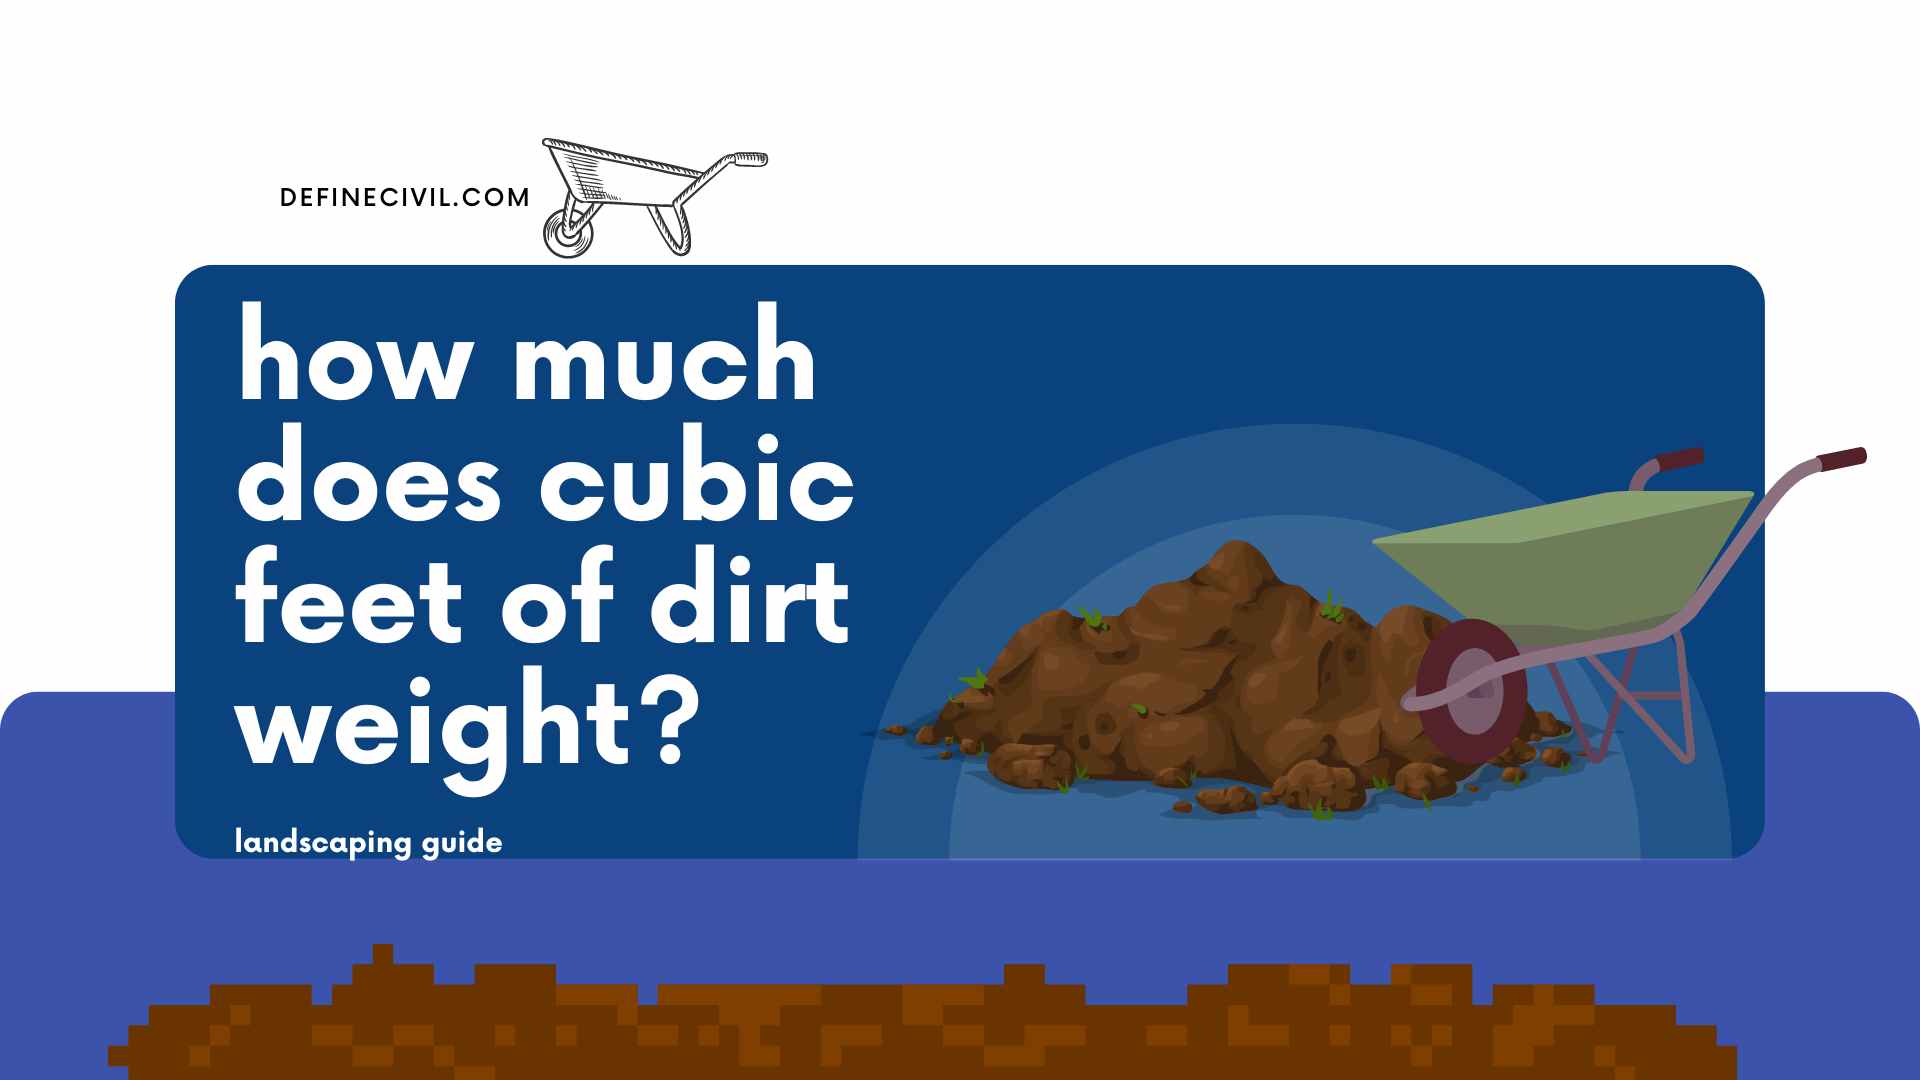 How much does cubic feet of dirt weight?